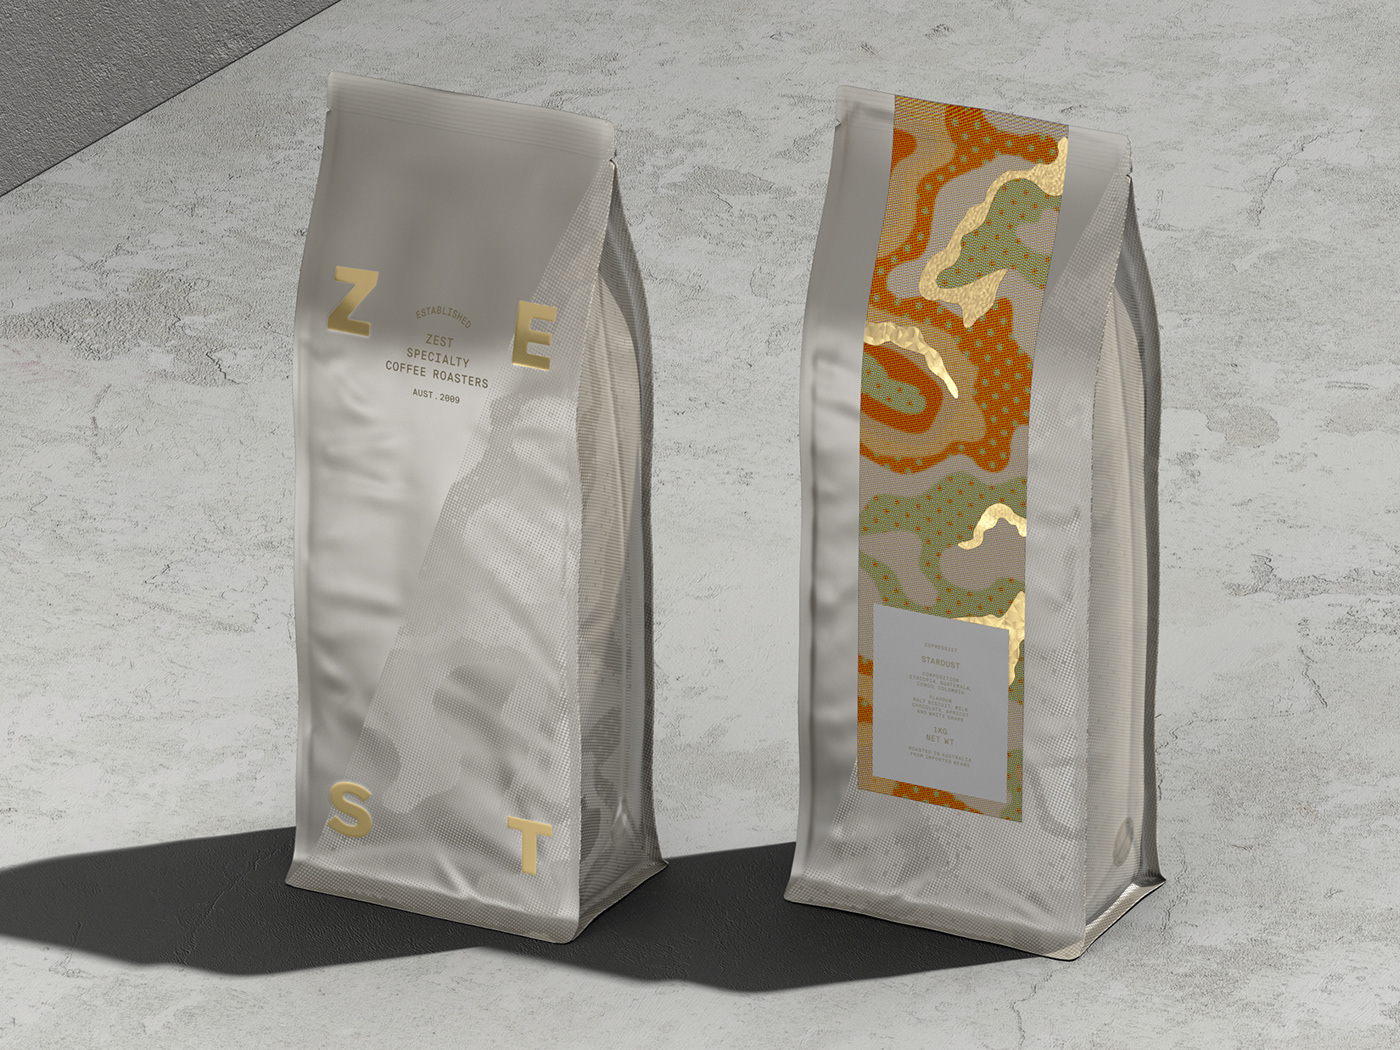 Coffee Coffee Bags coffee cup coffee roaster coffee tin foil gold foil Packaging topography